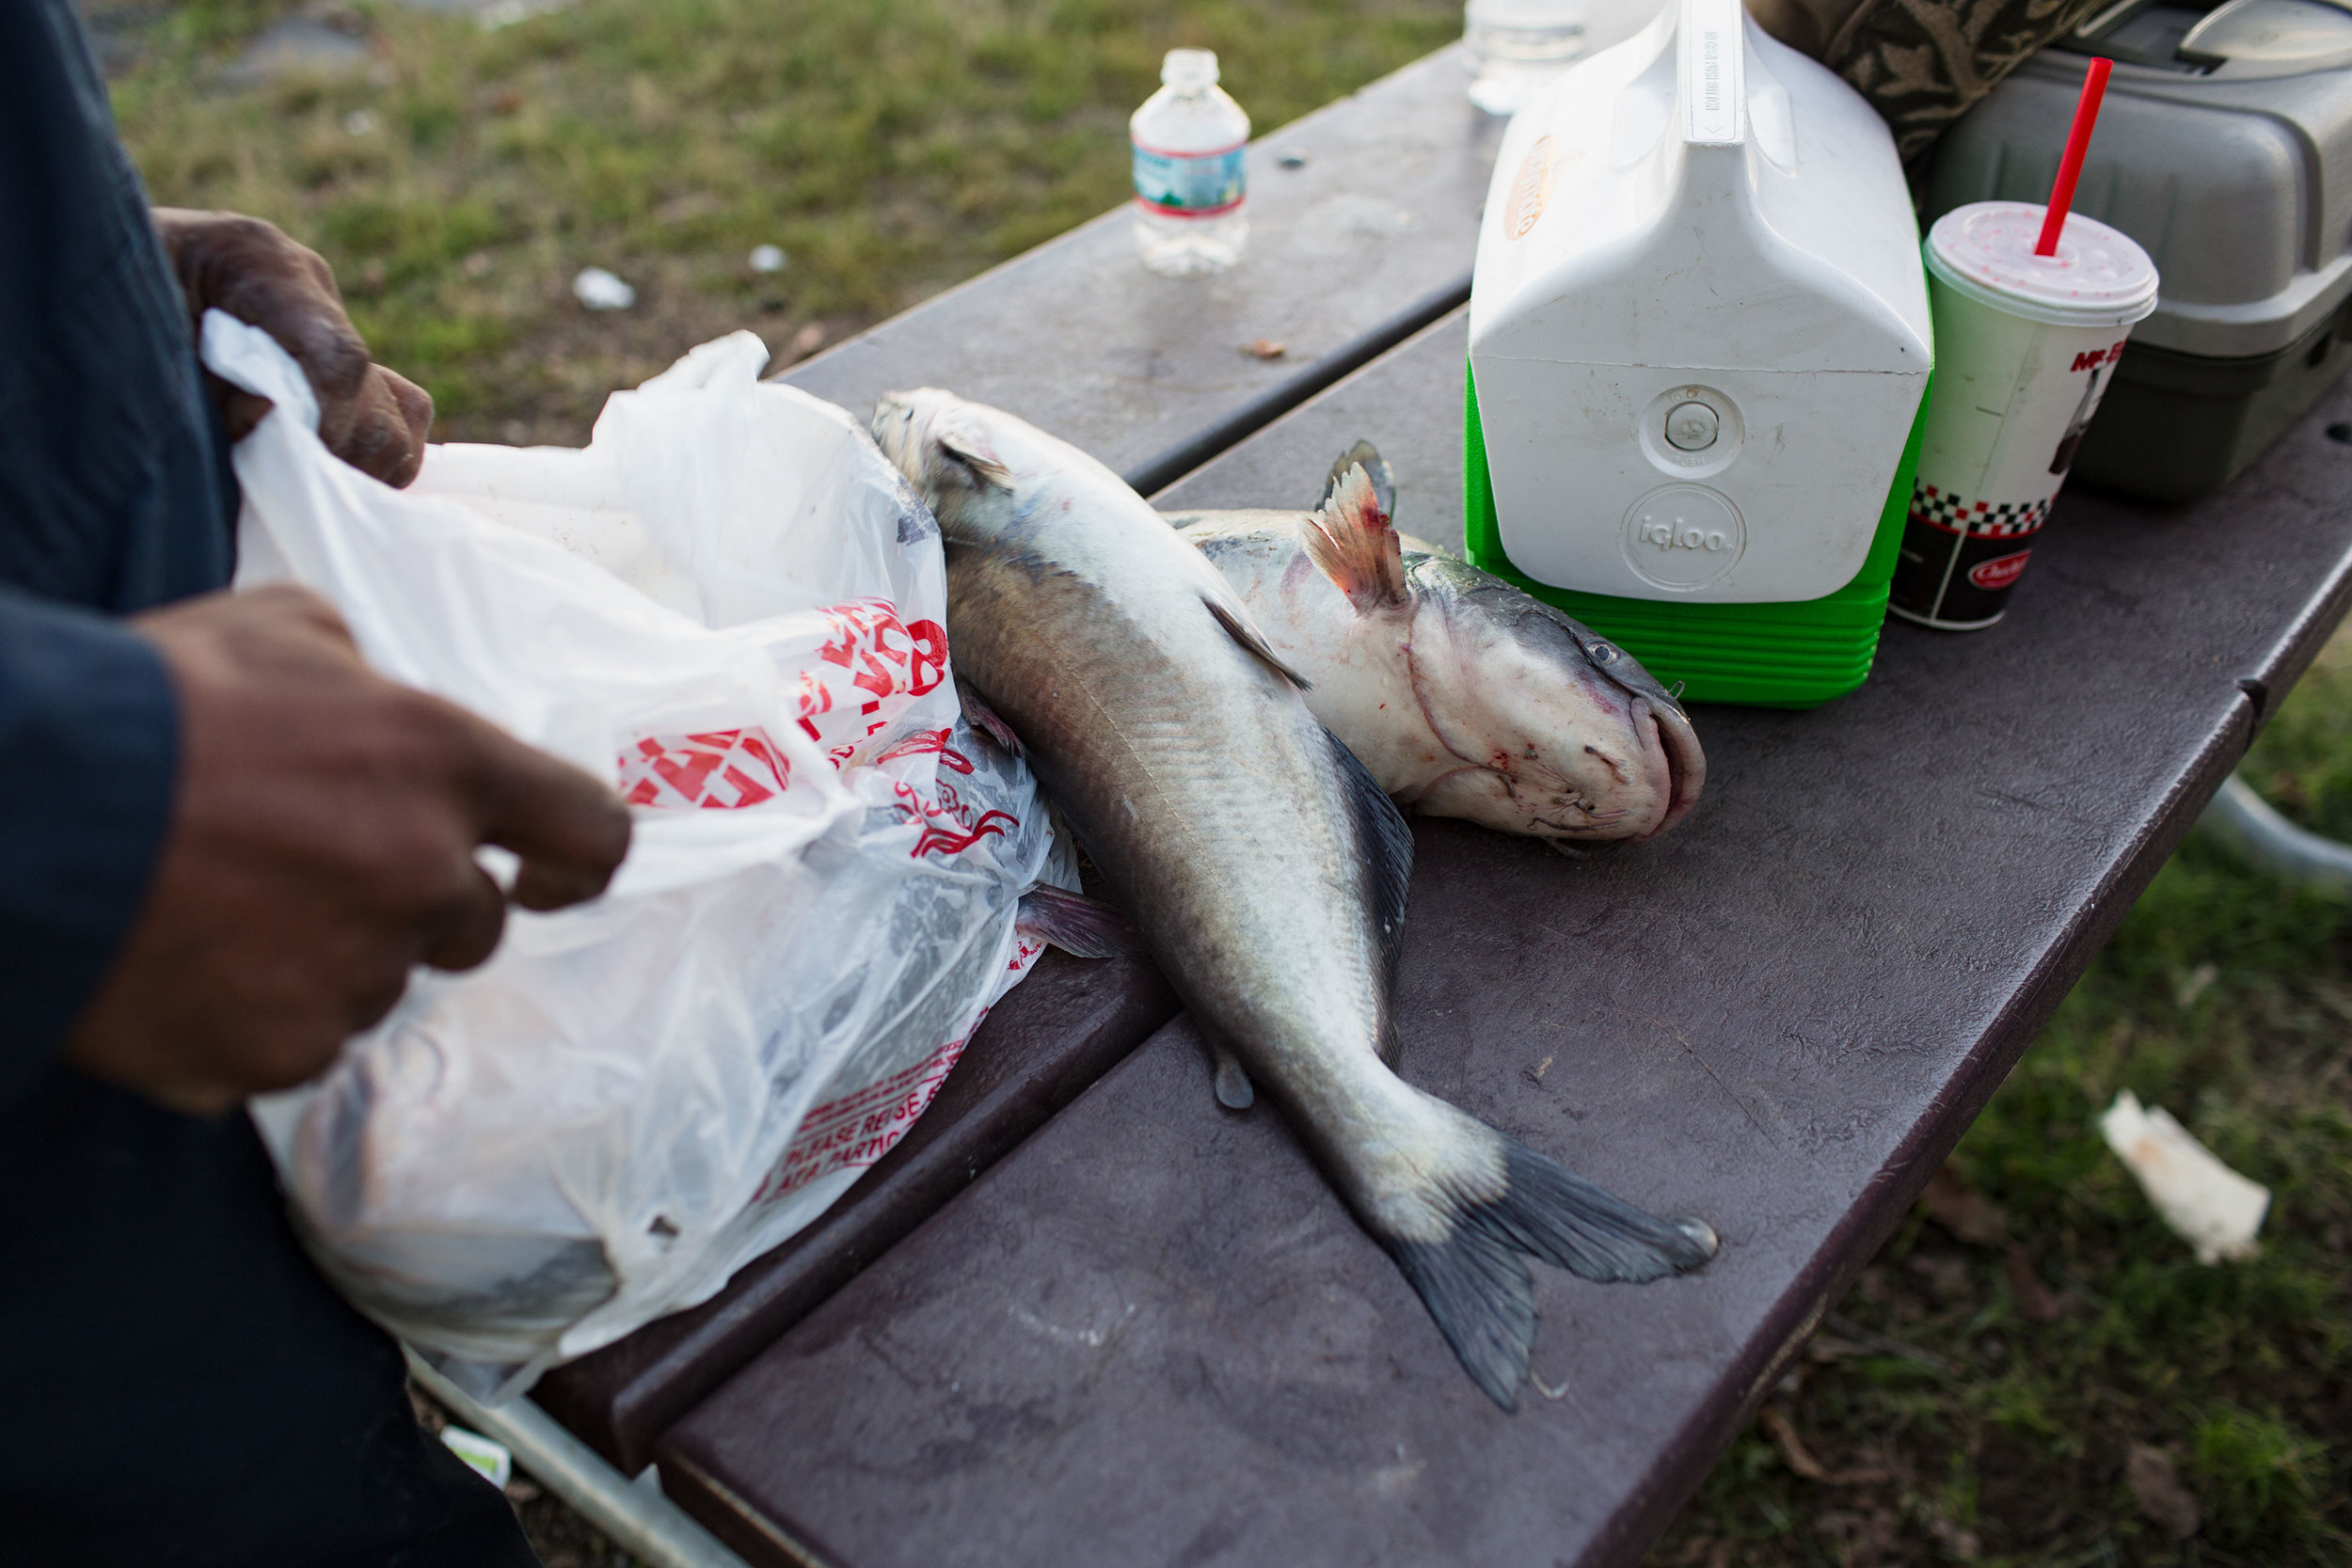  Many people fish from the historically polluted Anacostia River, but there are consumption advisories posted in English and Spanish along shoreline, "A consumption advisory is in effect for fish caught in these waters," the signs read, prompting ang